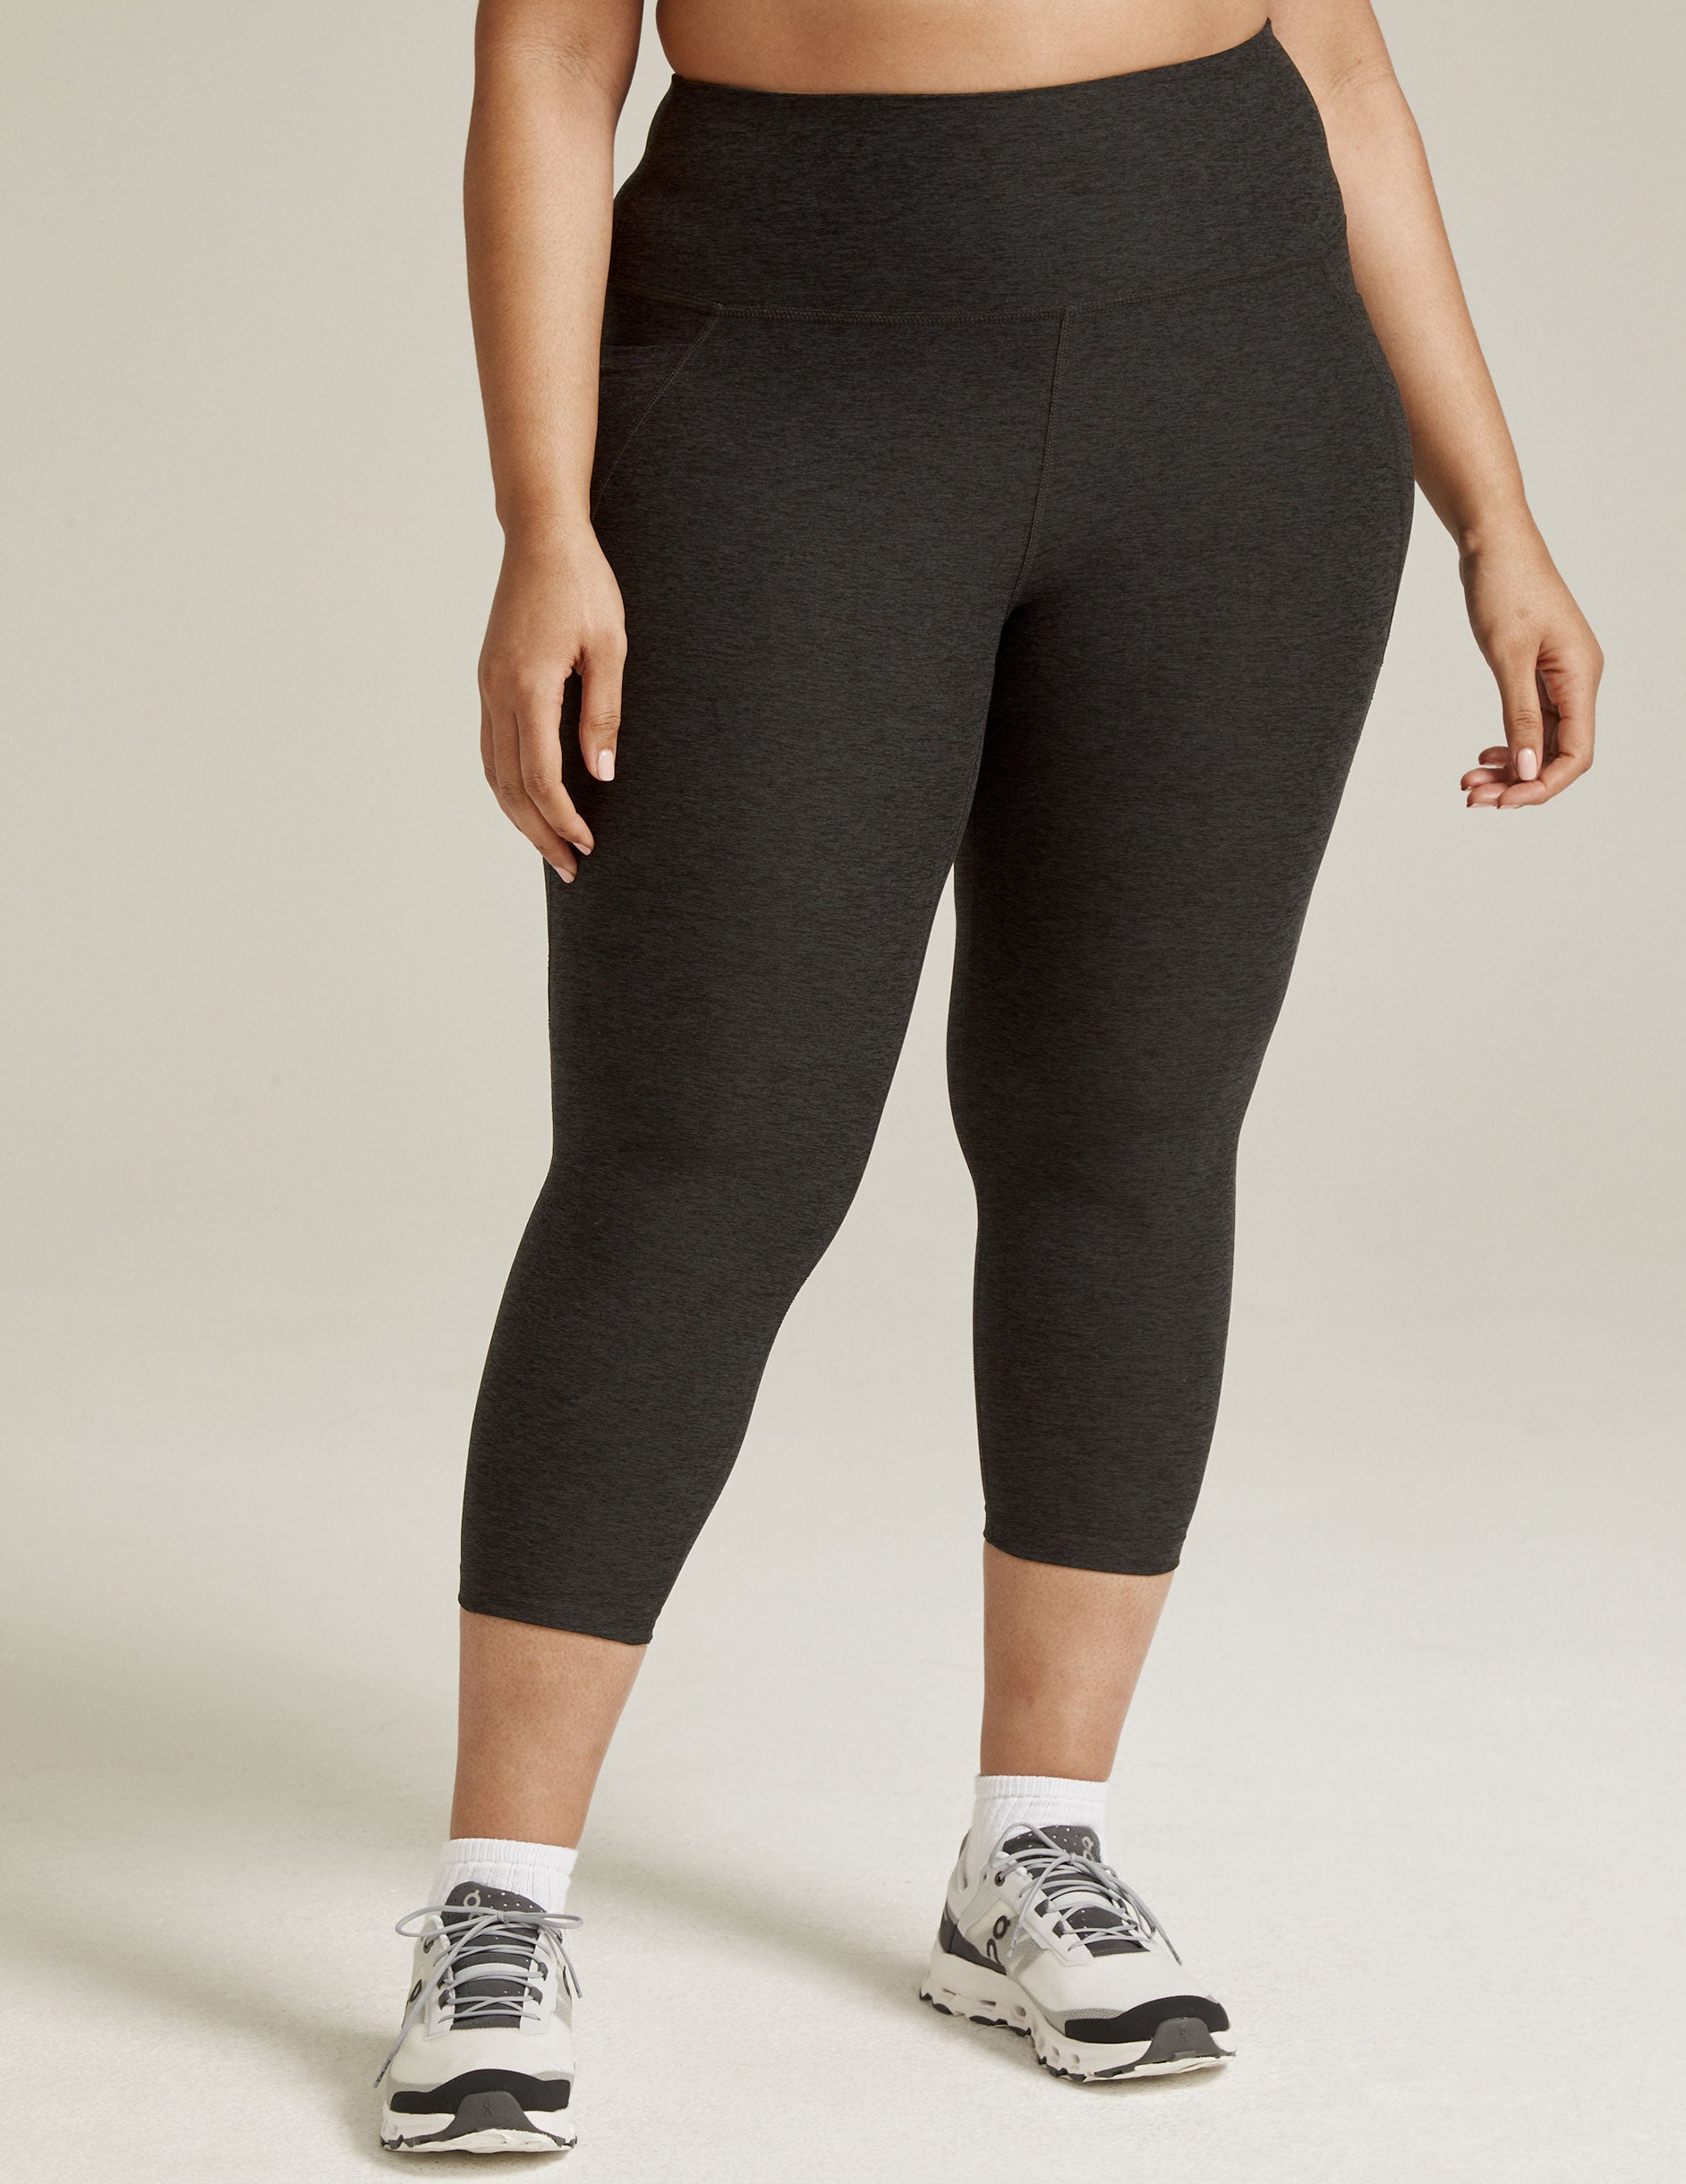 High Waisted Yoga Pants for Women with Pockets Capri India